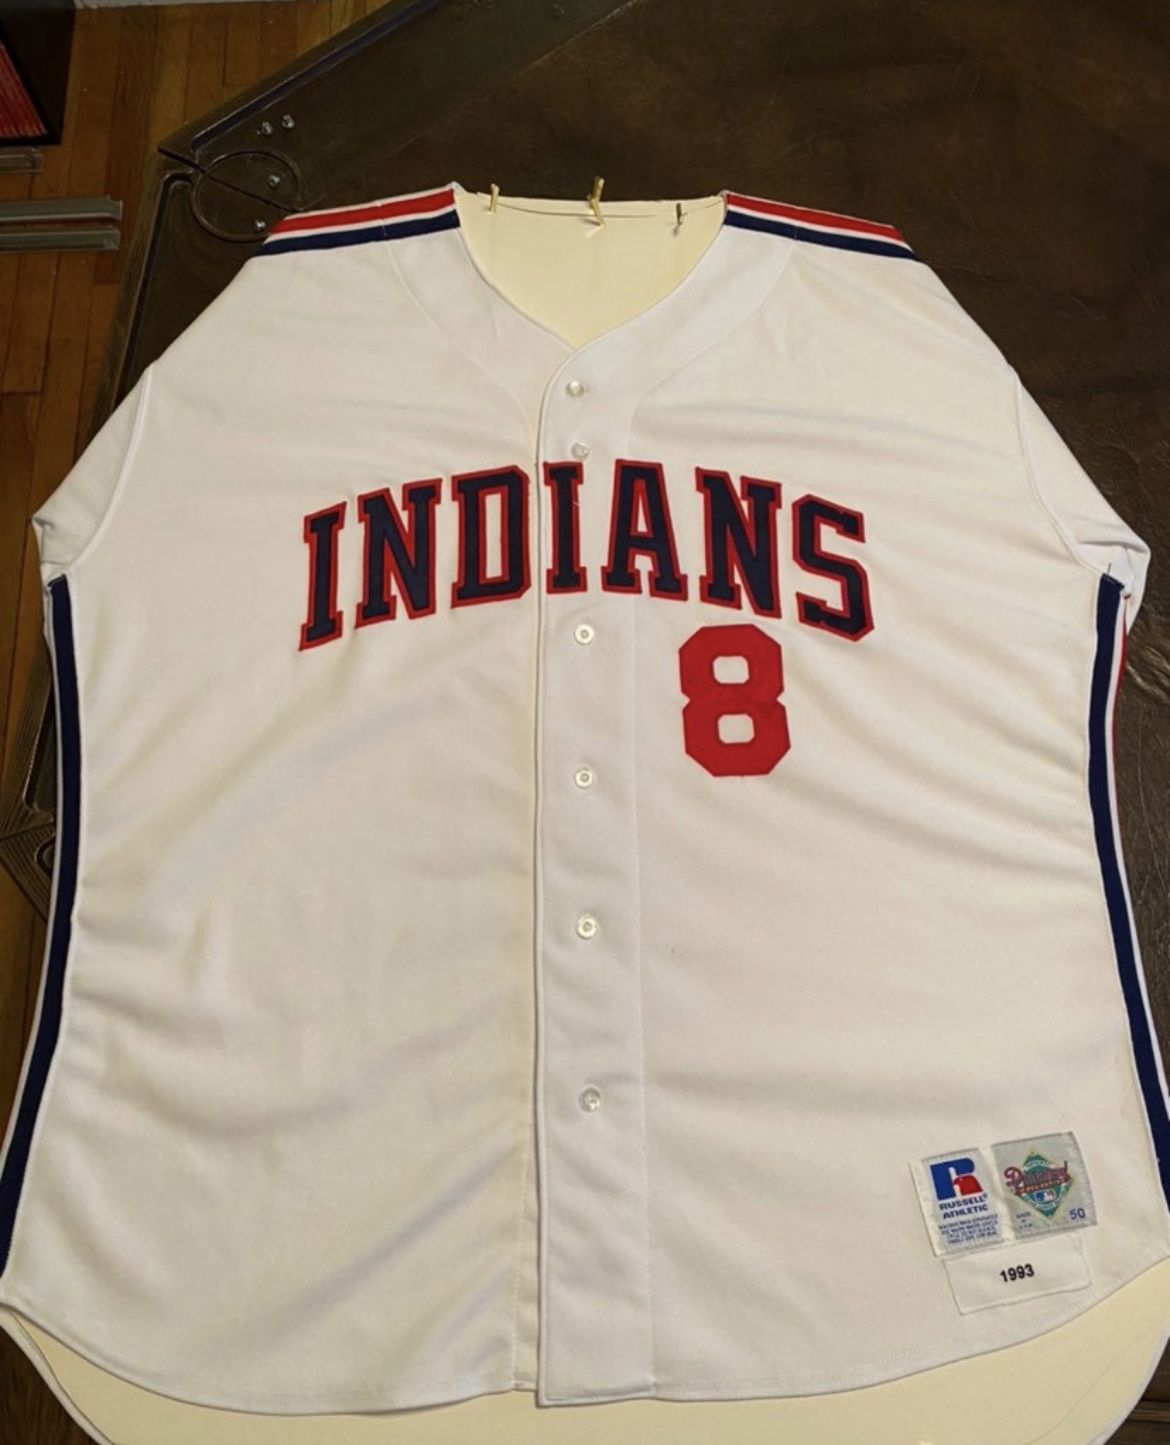 1993 Albert Belle Game Worn Jersey for Sale in Brunswick, OH - OfferUp